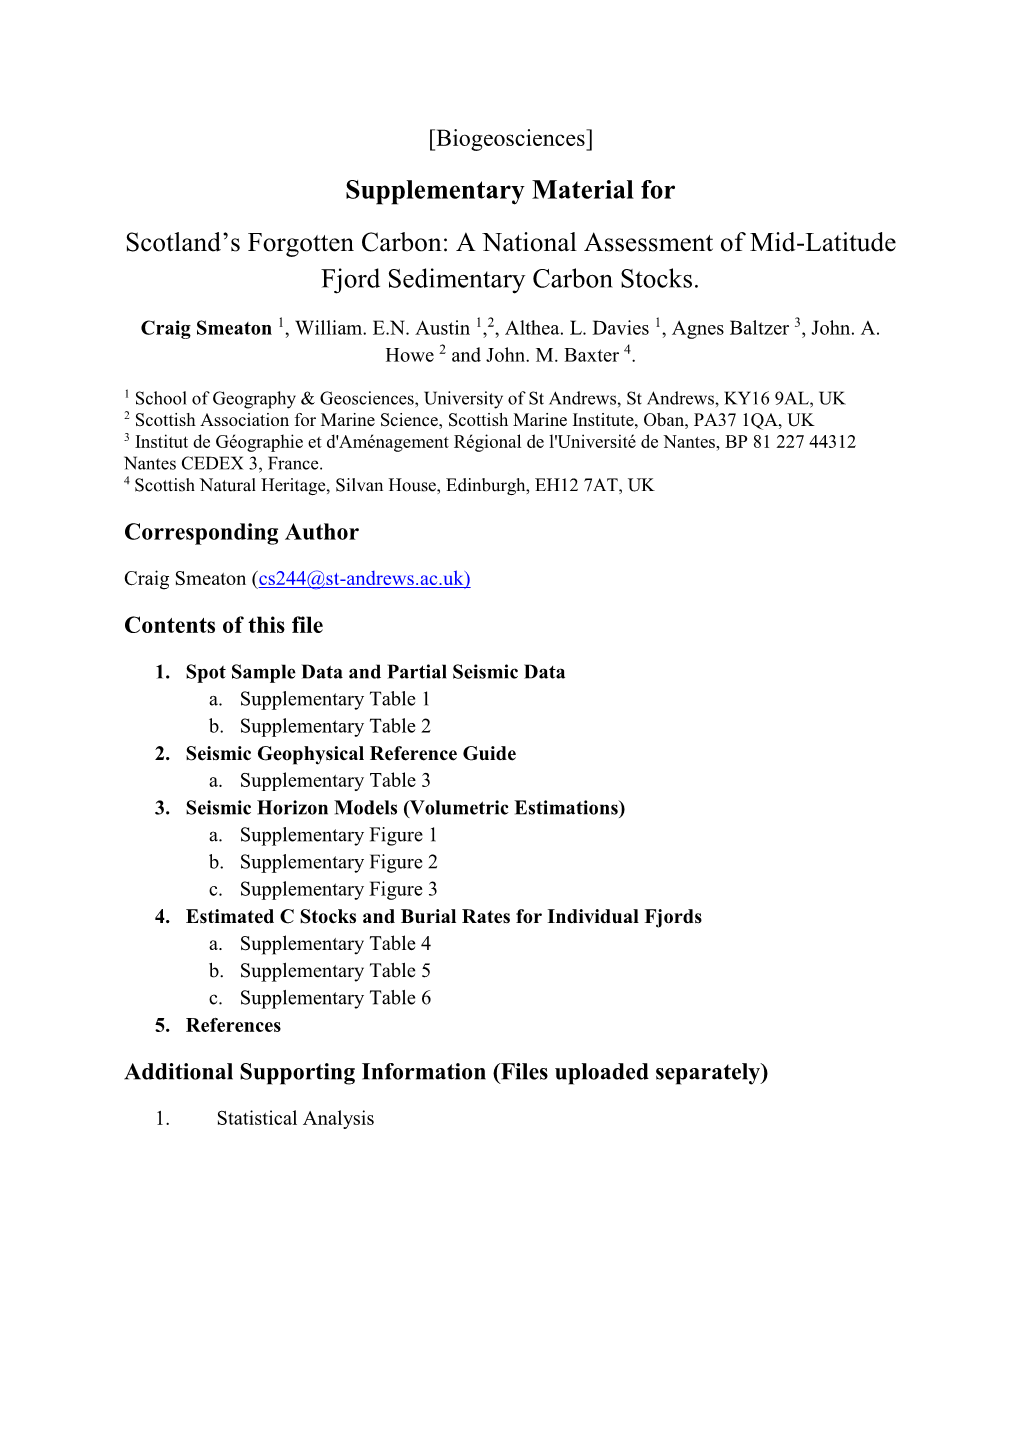 A National Assessment of Mid-Latitude Fjord Sedimentary Carbon Stocks